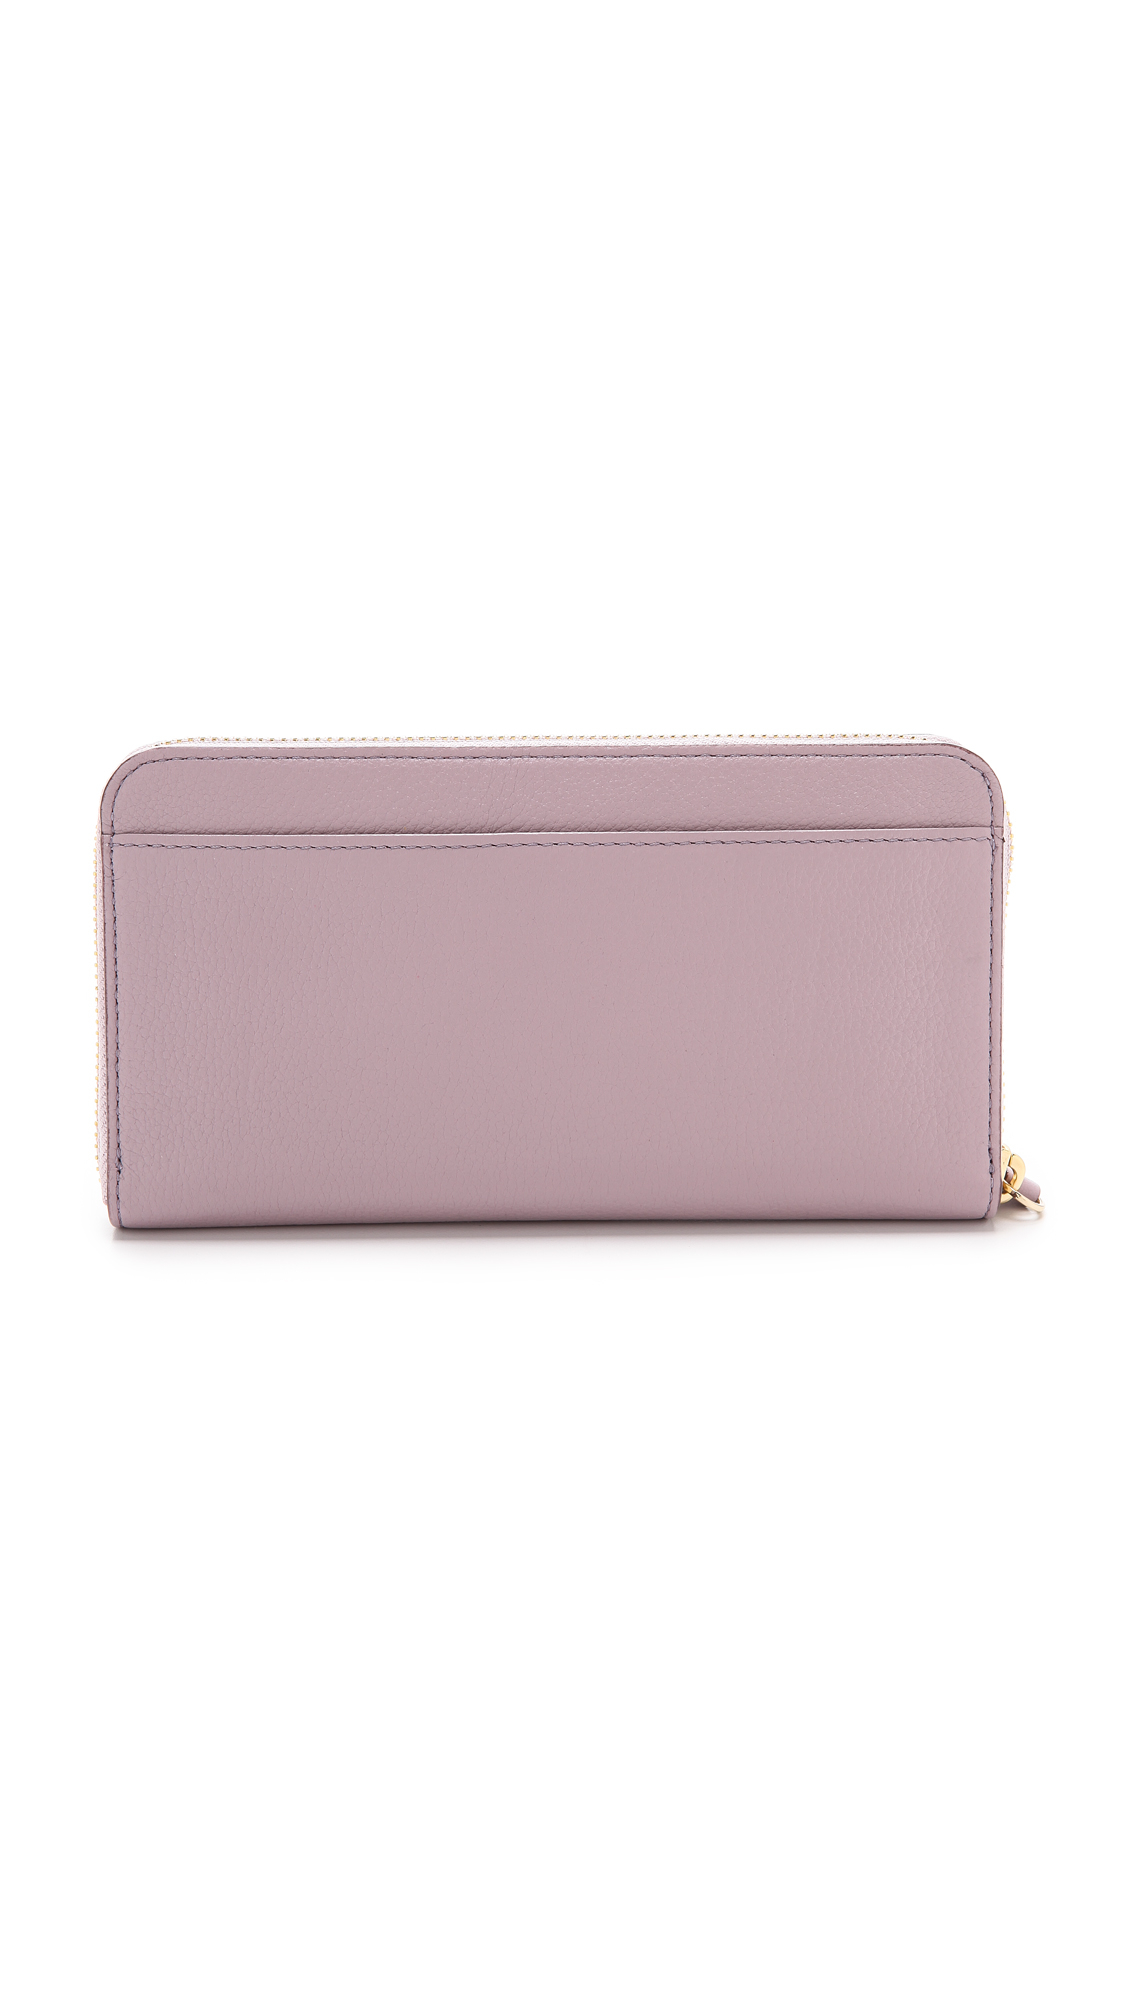 Kate spade new york Cobble Hill Lacey Wallet - Lilac Bliss in Purple | Lyst